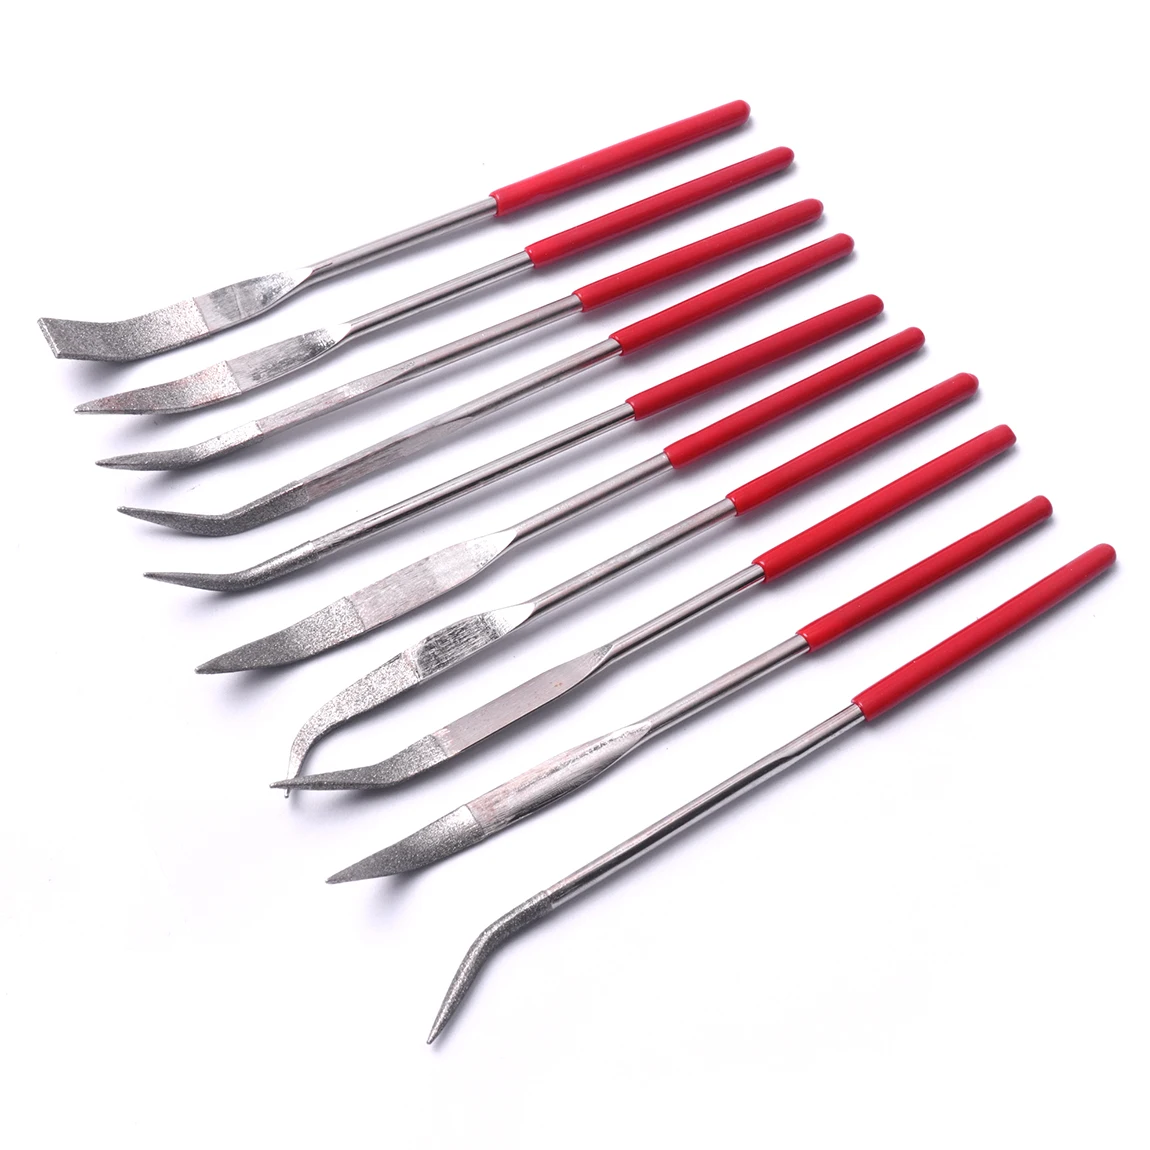 10pcs/set Diamond Needle File 4*160mm Coated Lapidary Bent Curved Files Mechanical Watch Jewelry Files Tools Set